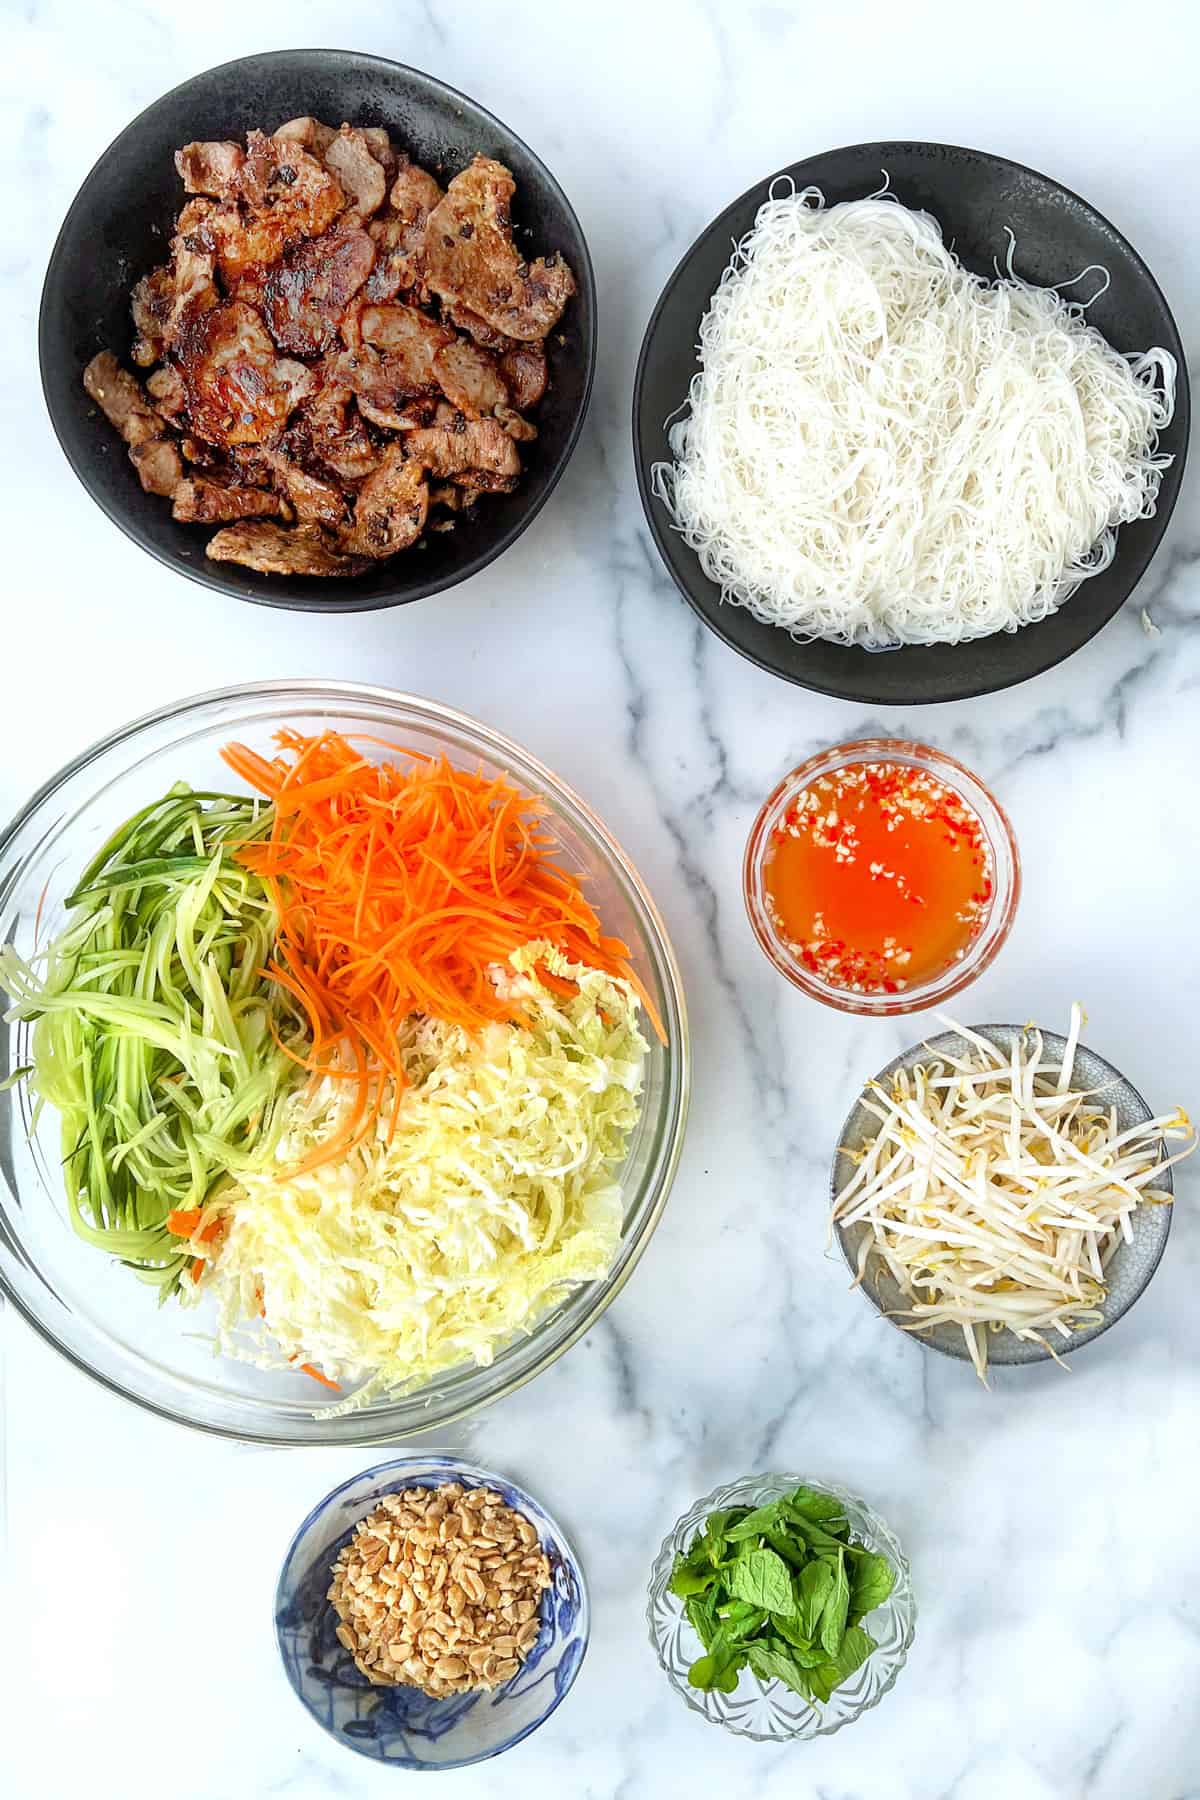 bowls of ingredients on a marble counter: caramelized pork slices, thin vermicelli rice noodles, shredded carrots, cucumbers and cabbage in a glass bowl, bean sprouts, chopped peanuts, mint leaves, and vietnamese chili garlic dipping sauce.